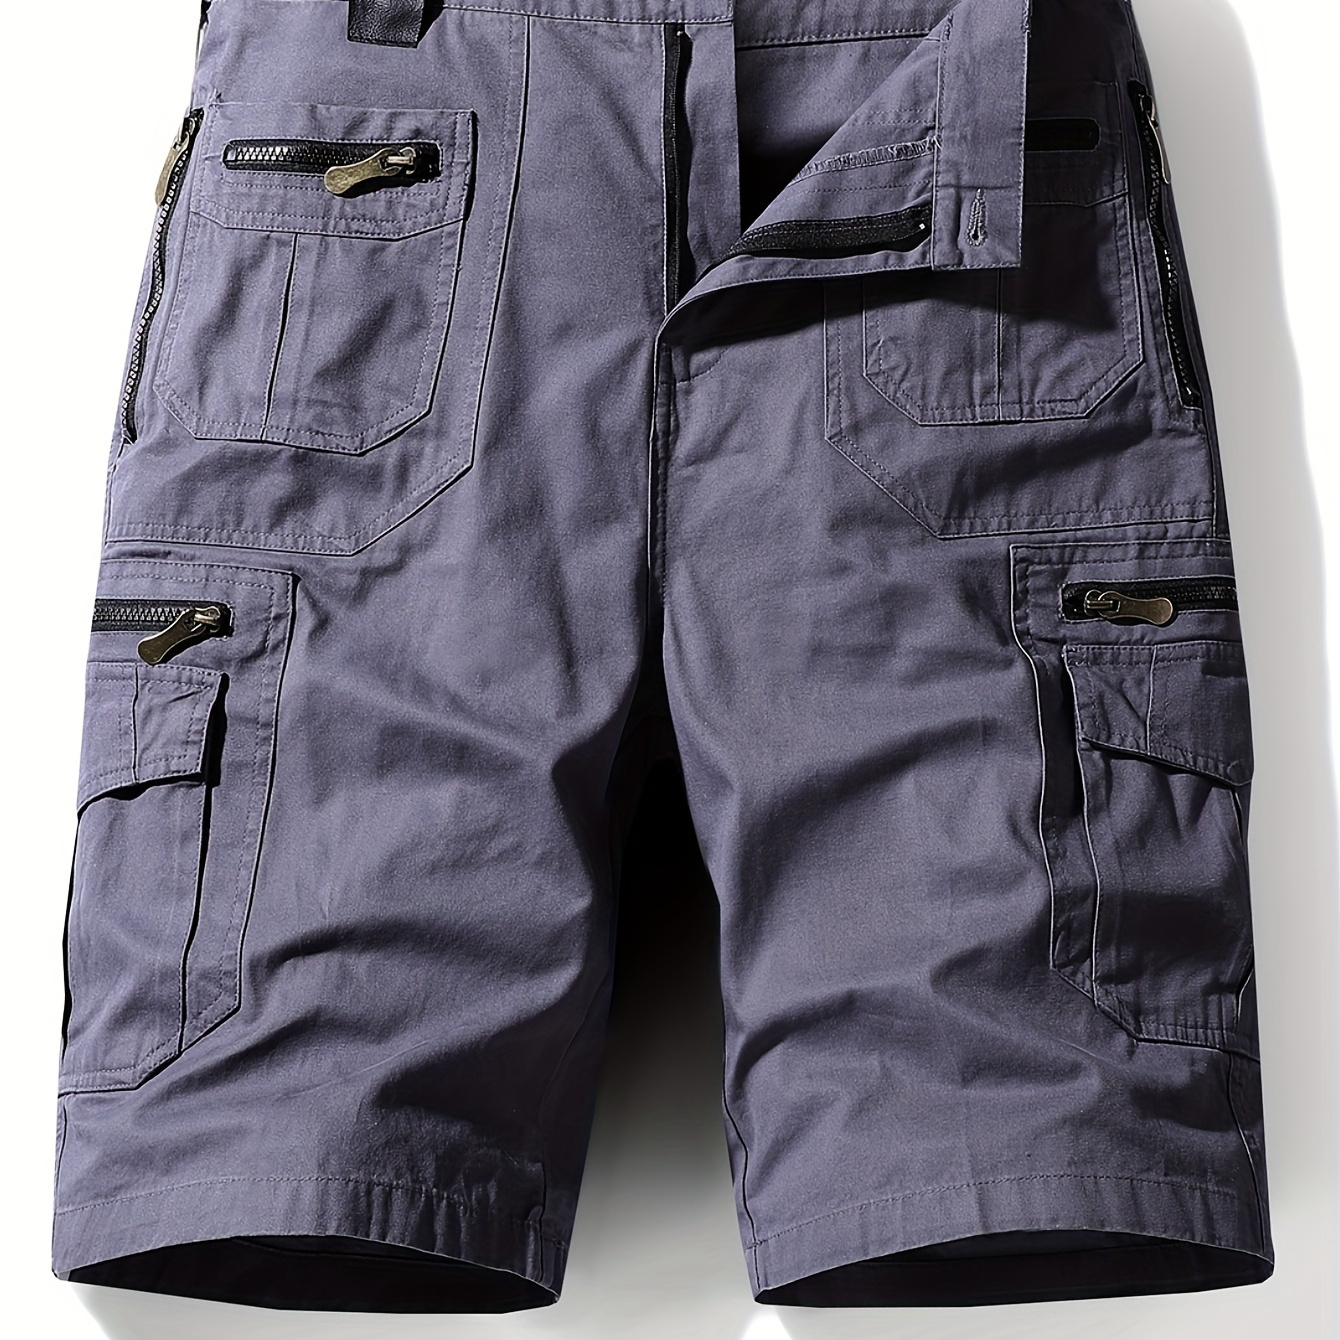 

Shorts with practical pockets for men, perfect for outdoor activities during the summer season.